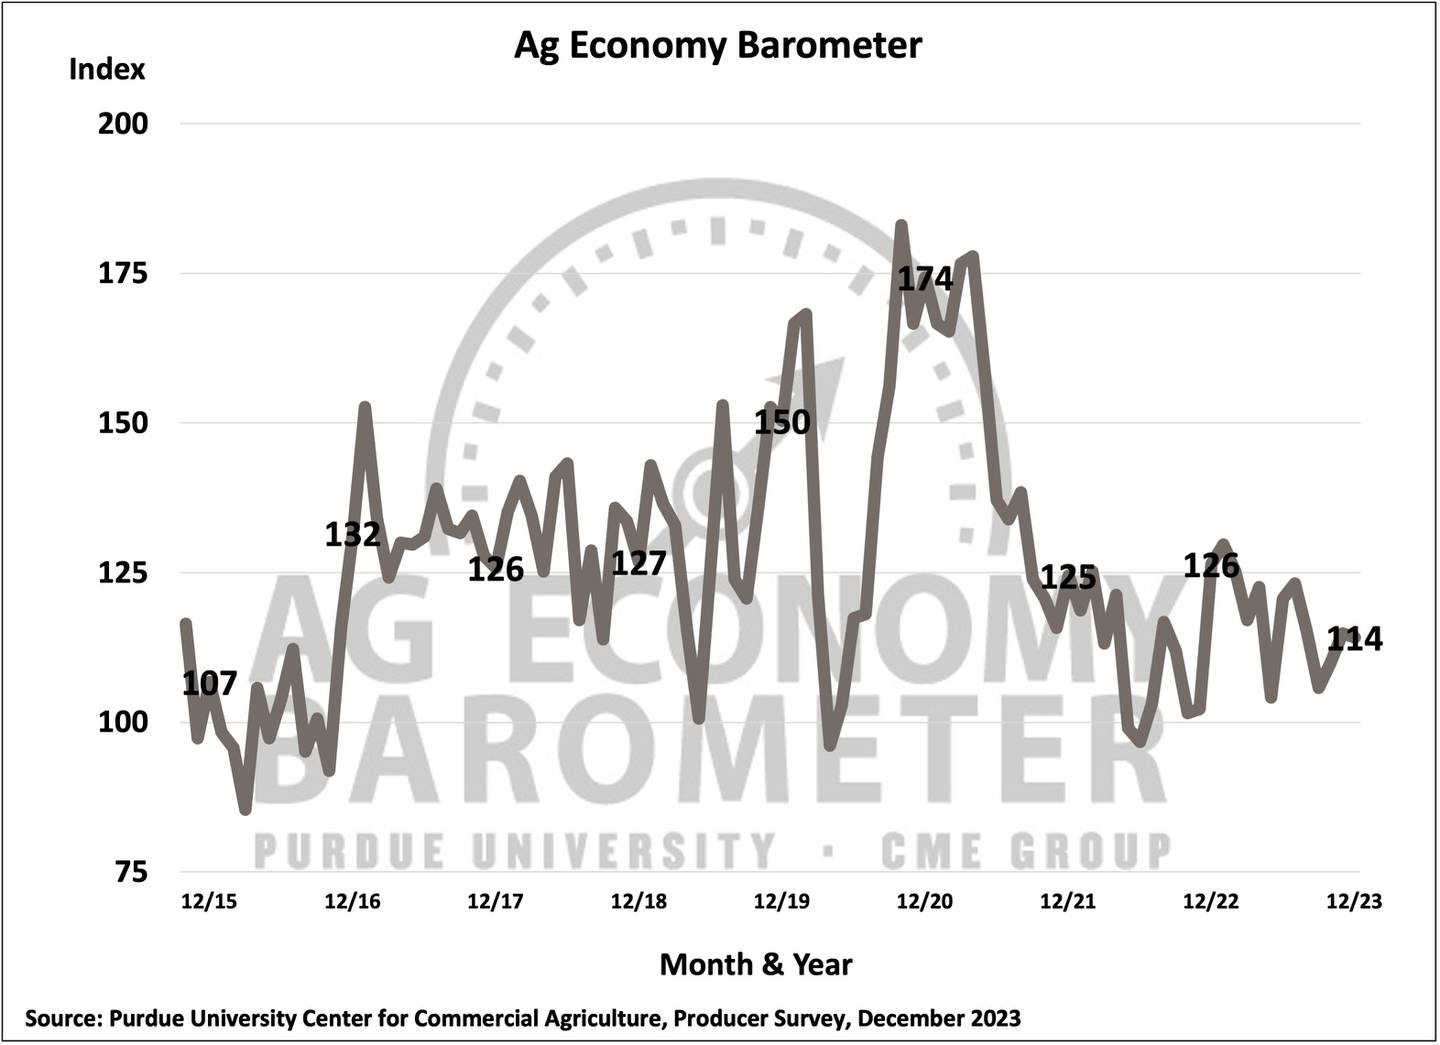 U.S. farmer sentiment is stable as inflation expectations subside.